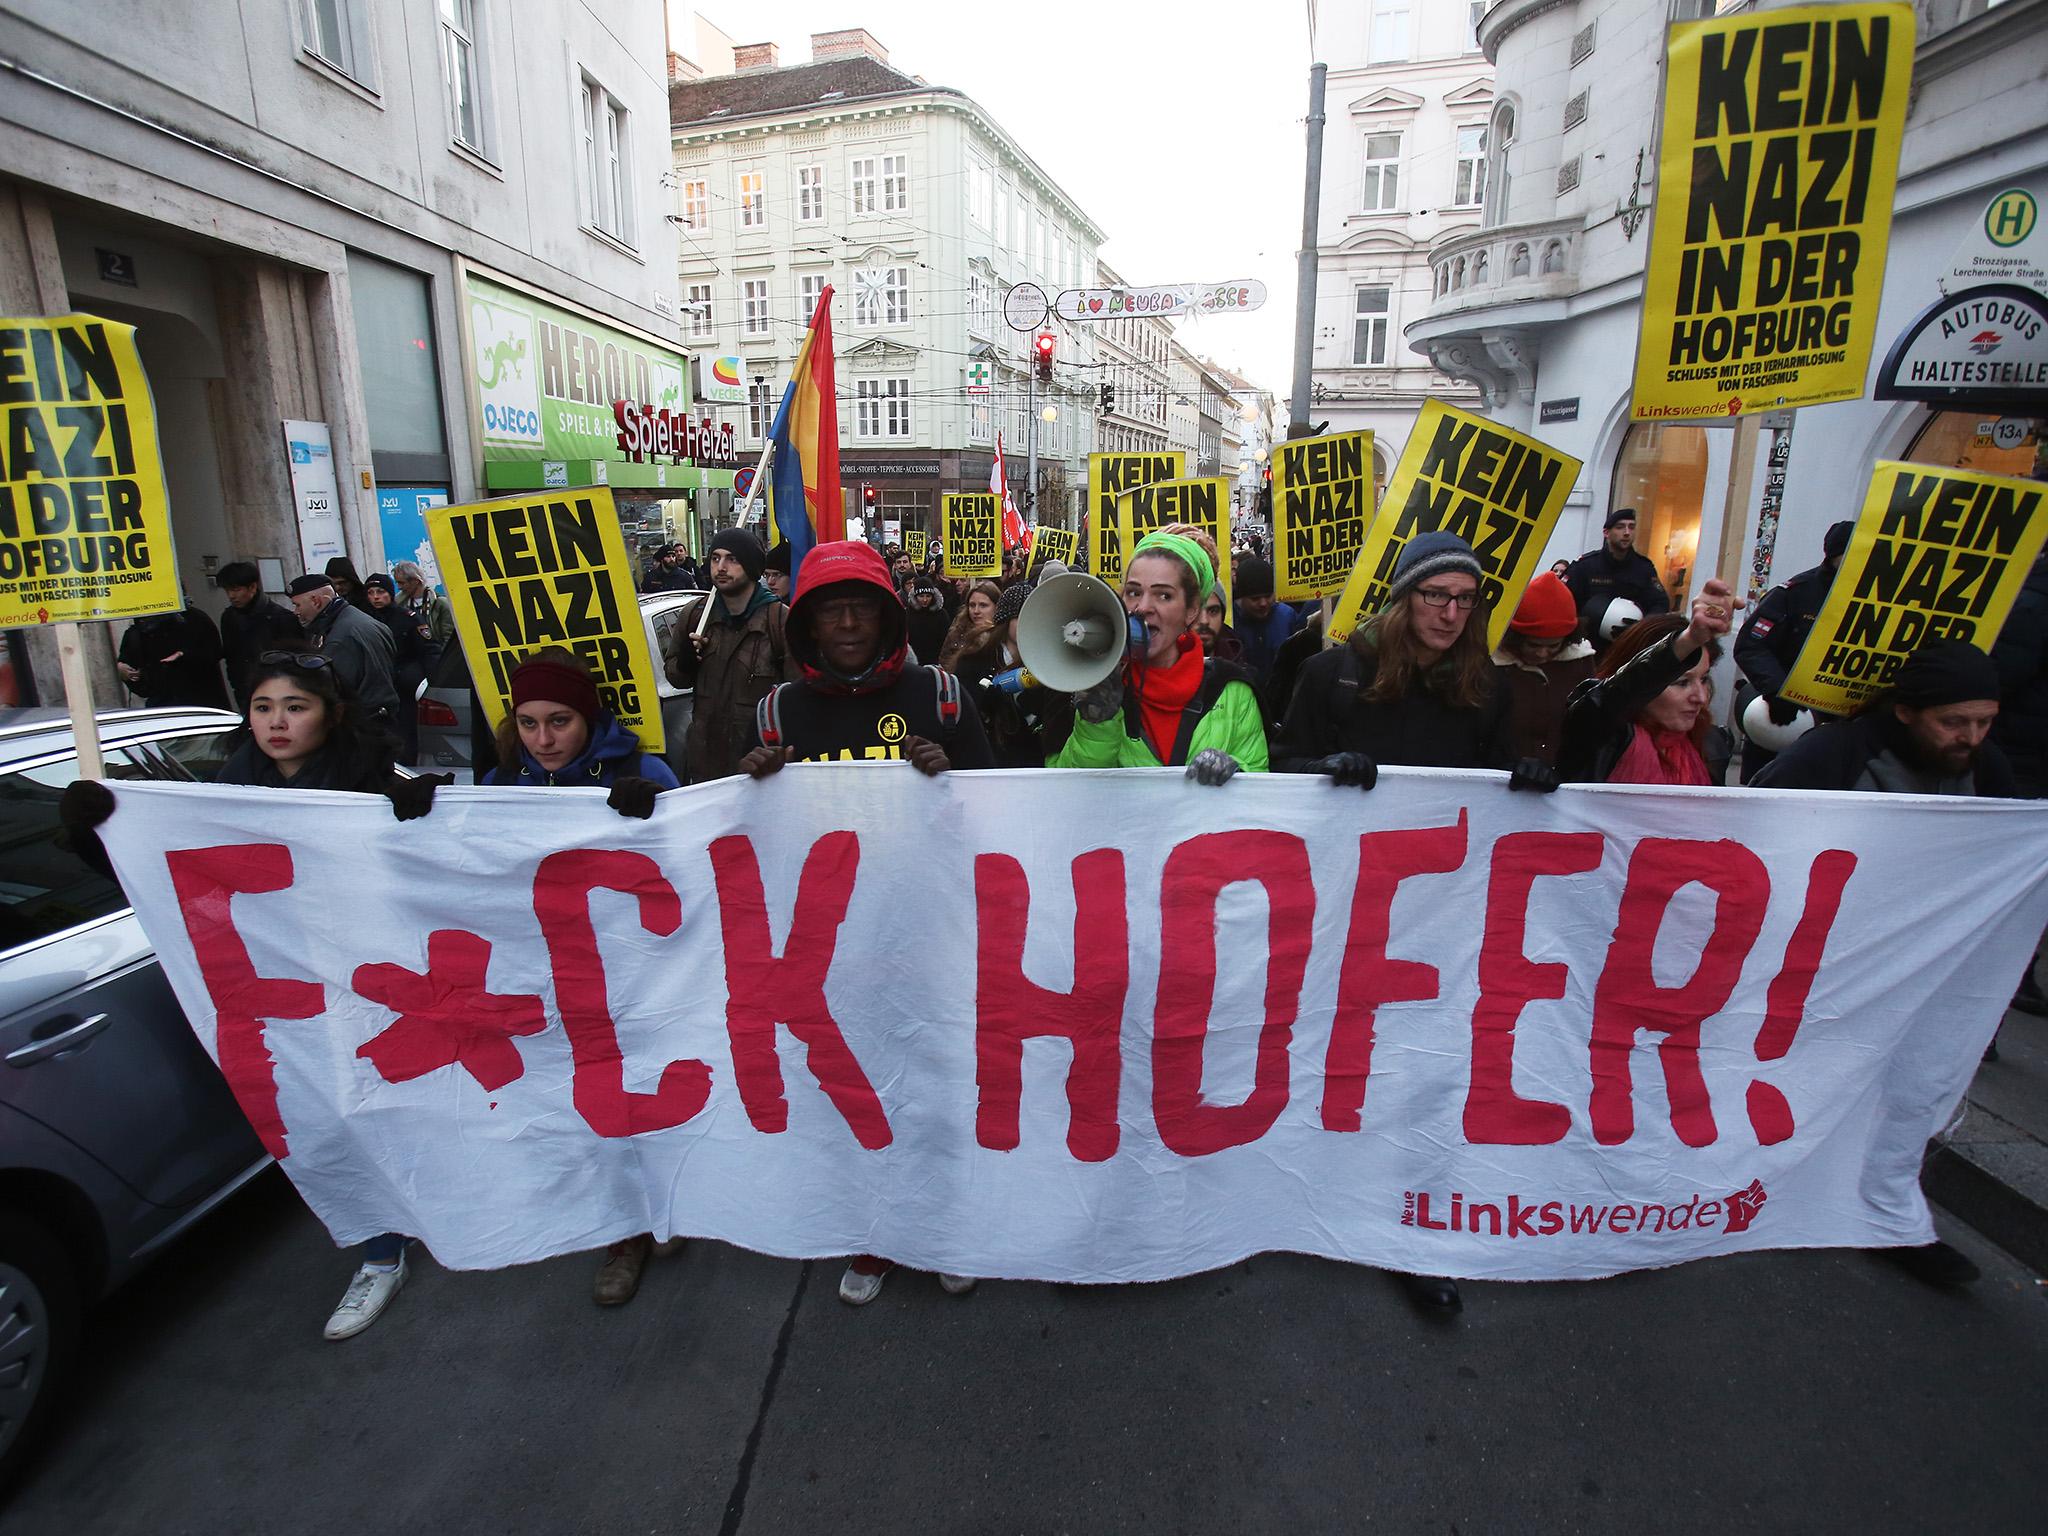 A protest against FPO presidential candidate Norbert Hofer